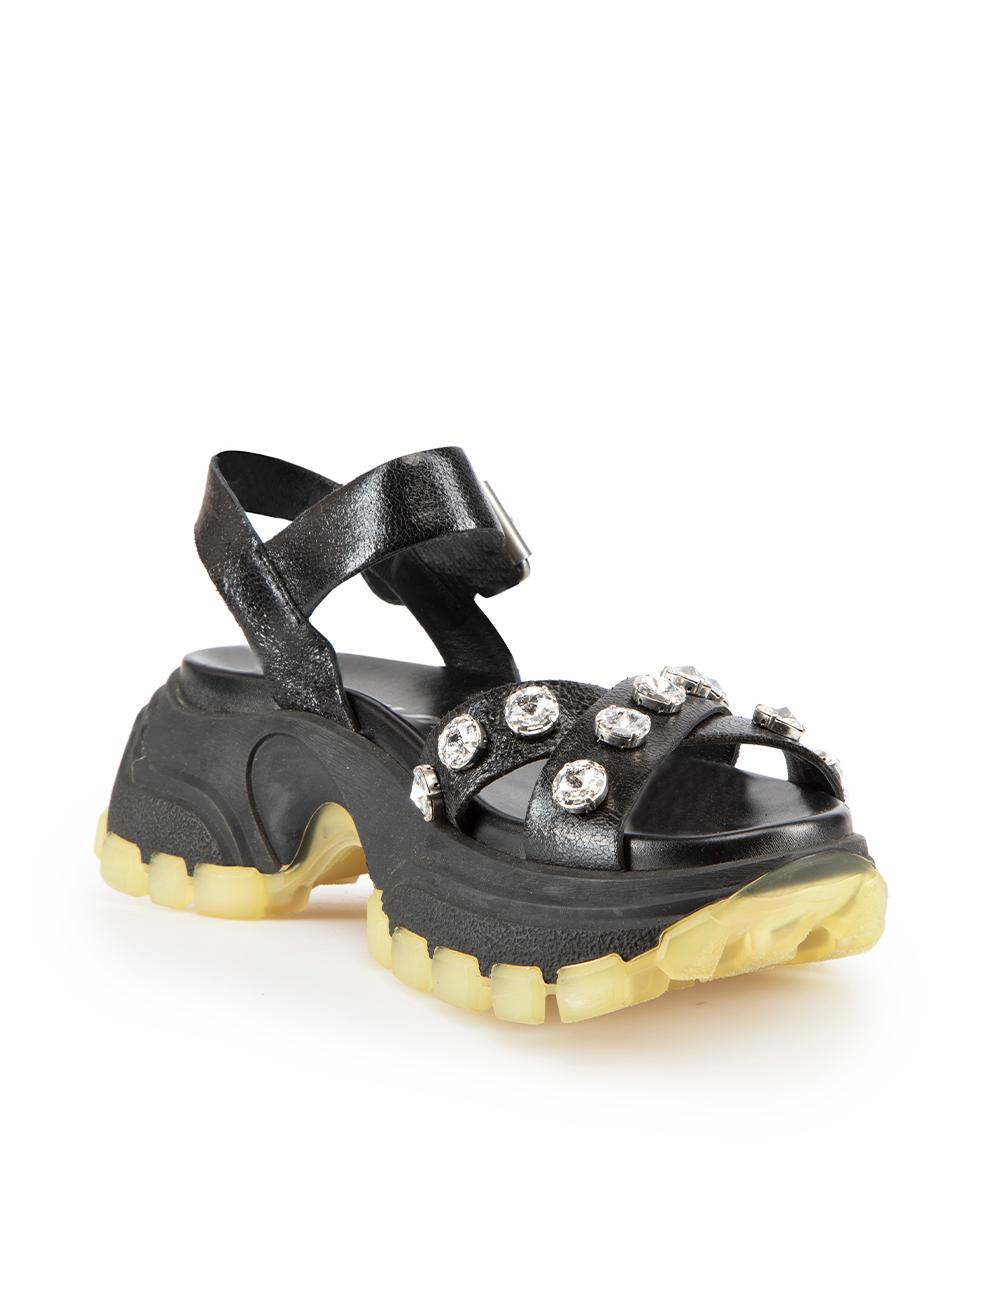 CONDITION is Never worn. No visible wear to sandals is evident on this new Miu Miu designer resale item. These shoes come with original dust bag.

Details
Black
Leather
Sandals
Chunky platform
Open toe
Crystal embellished
Adjustable ankle